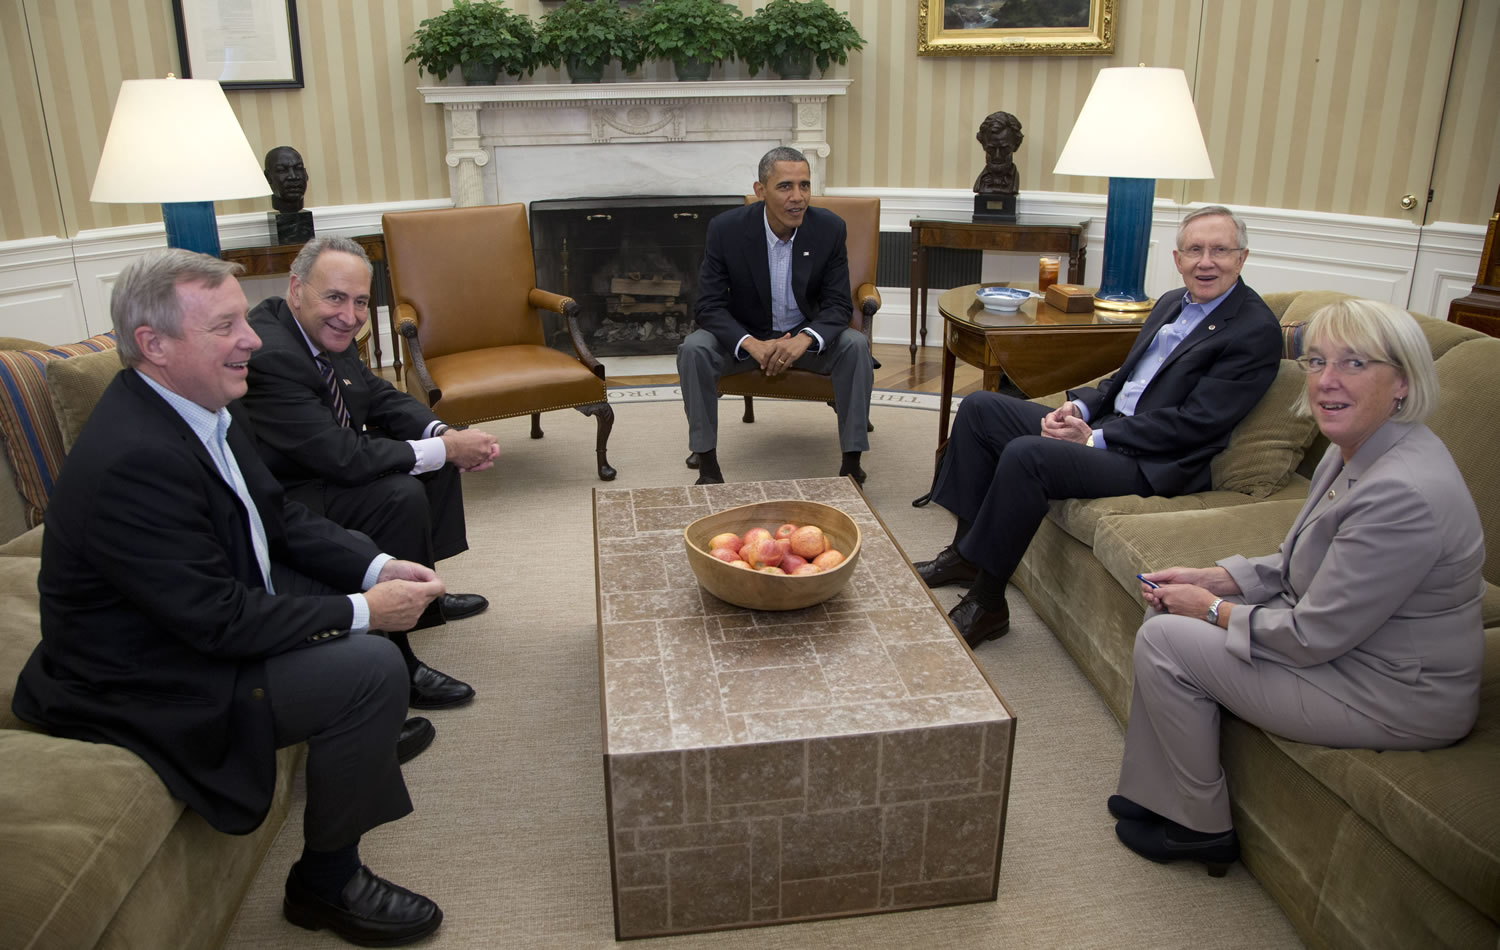 From left, Sen. Dick Durbin, D-Ill., Sen. Charles Schumer, D-N.Y., President Barack Obama, Senate Majority Leader Harry Reid of Nev., Sen. Patty Murray, D-Wash., look to photographers as they meet in the Oval Office of the White House, on Saturda in Washington. The federal government remains partially shut down and faces a first-ever default between Oct.